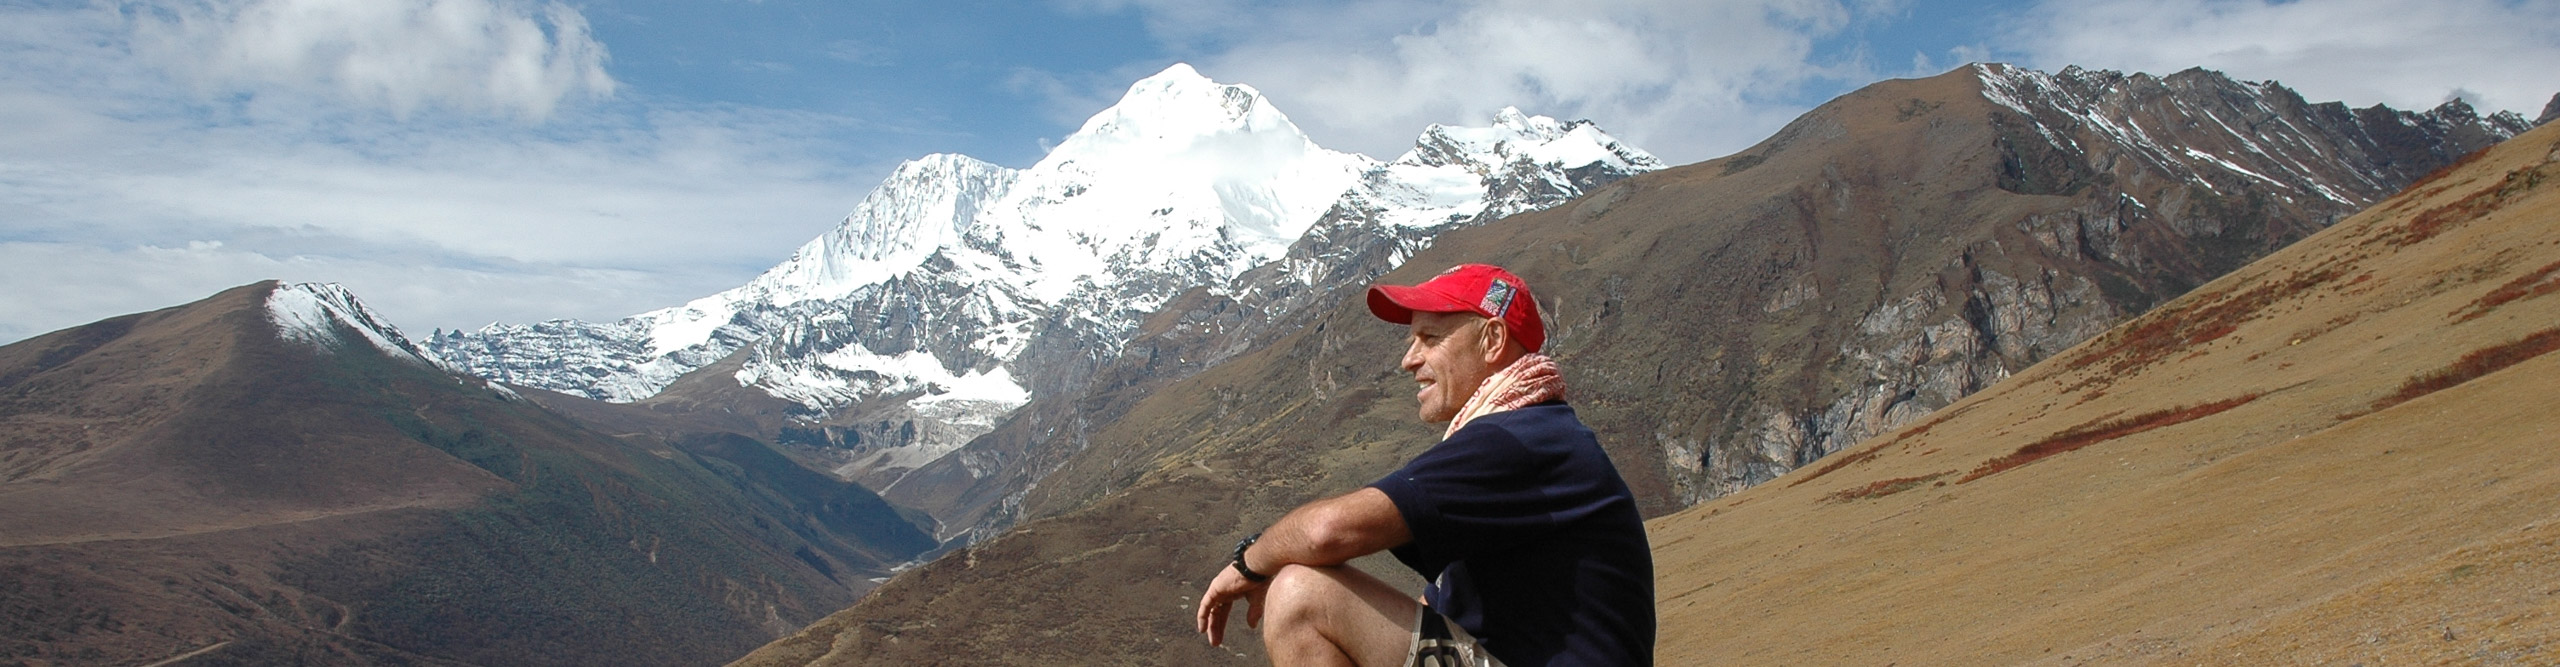 Man wearing a red cap looking at the view atop of the mountain in Bhutan on a clear sunny day